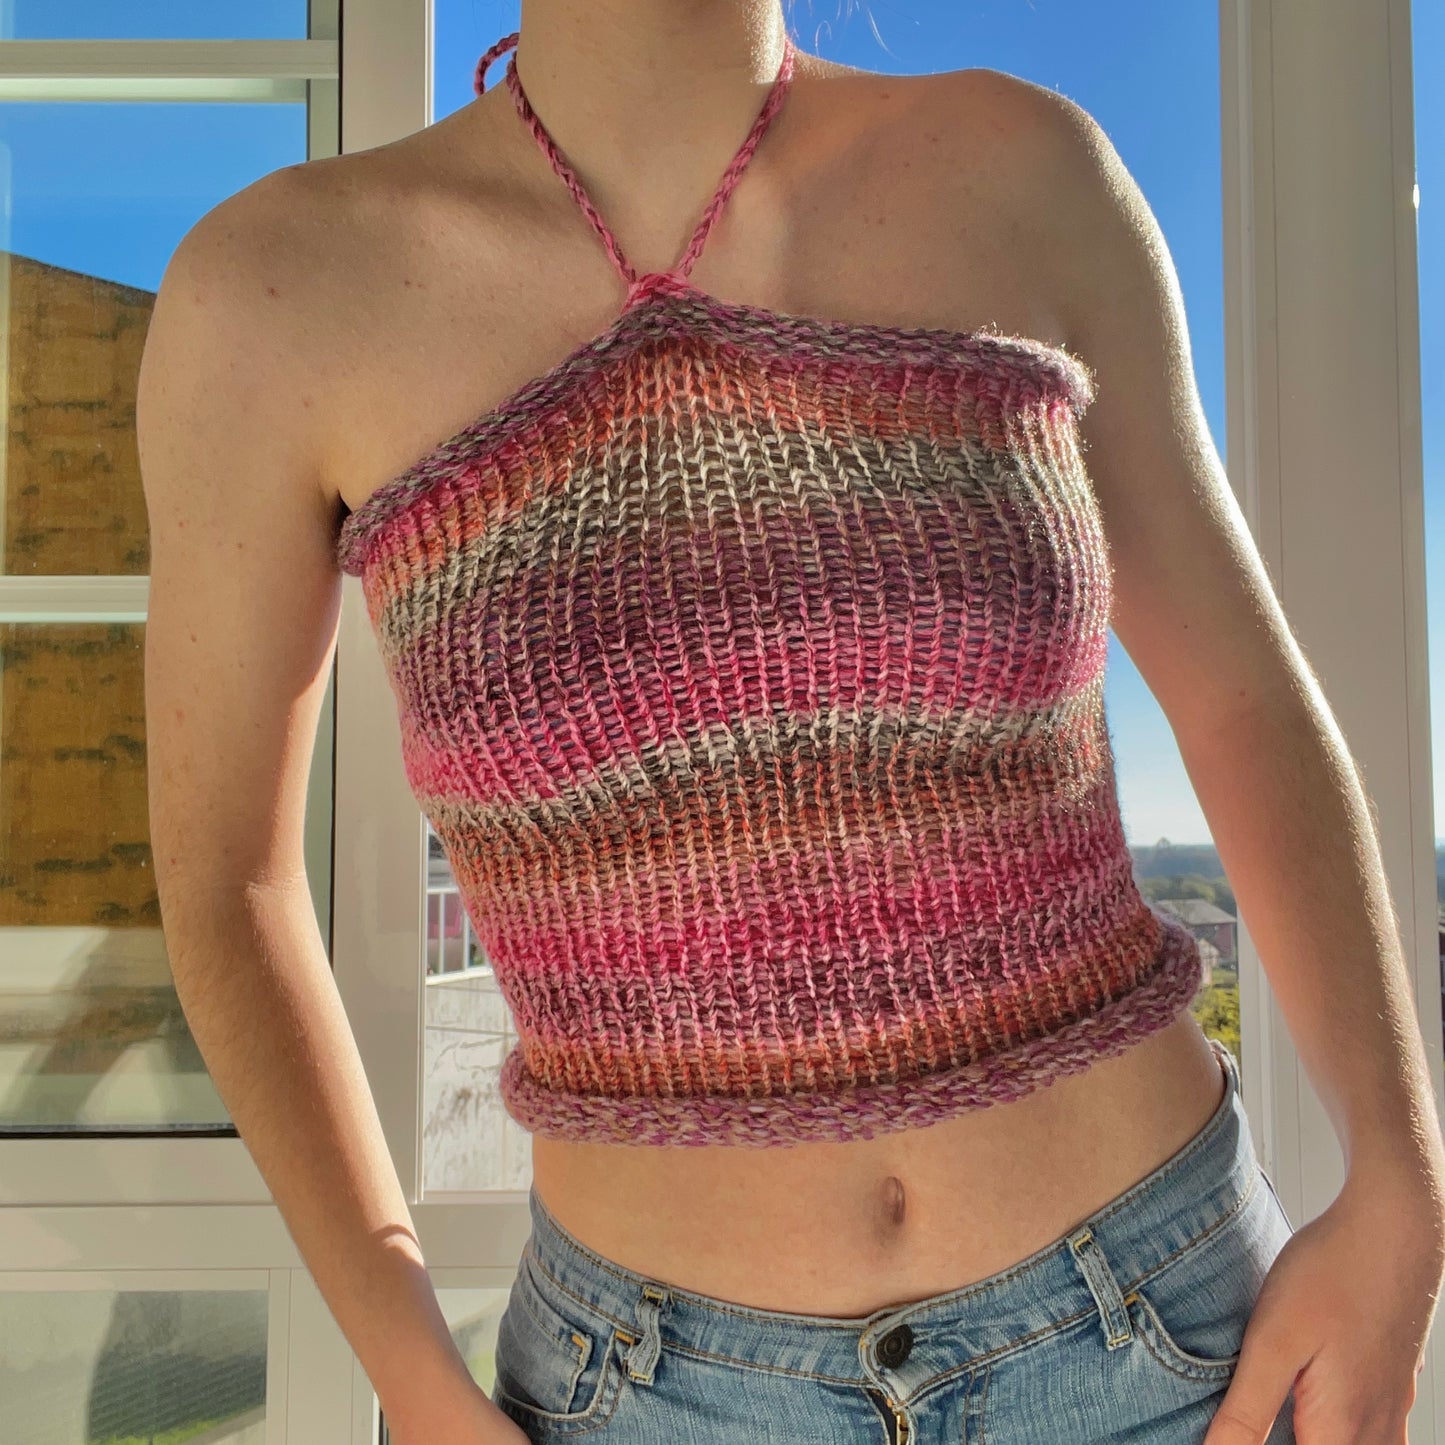 Handmade knitted halter top in pink, purple, coral and grey